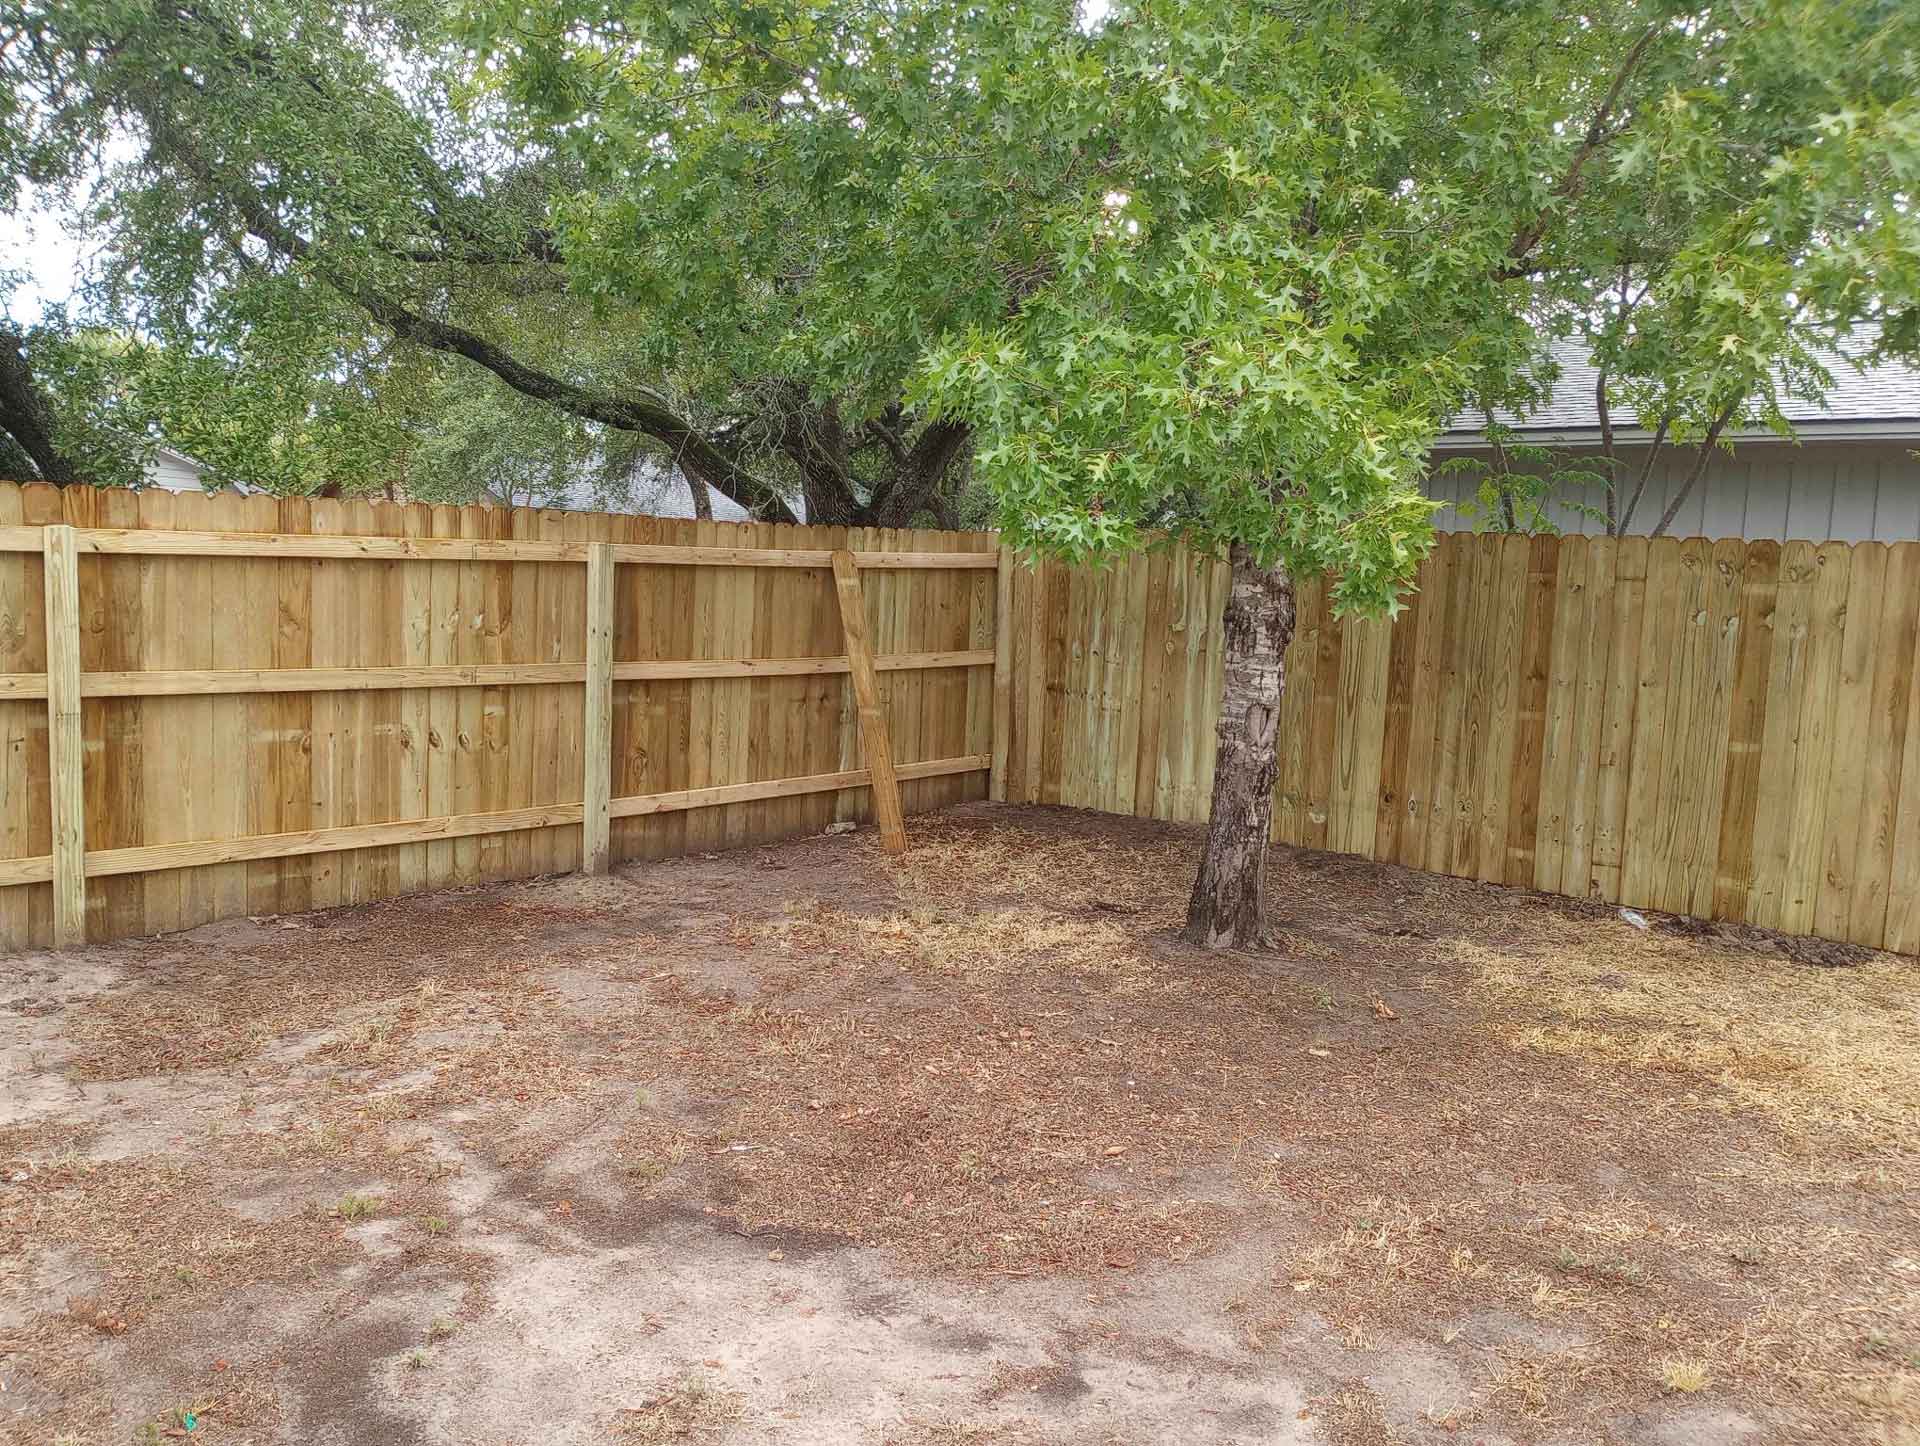 Wooden fence in a backyard with one tree